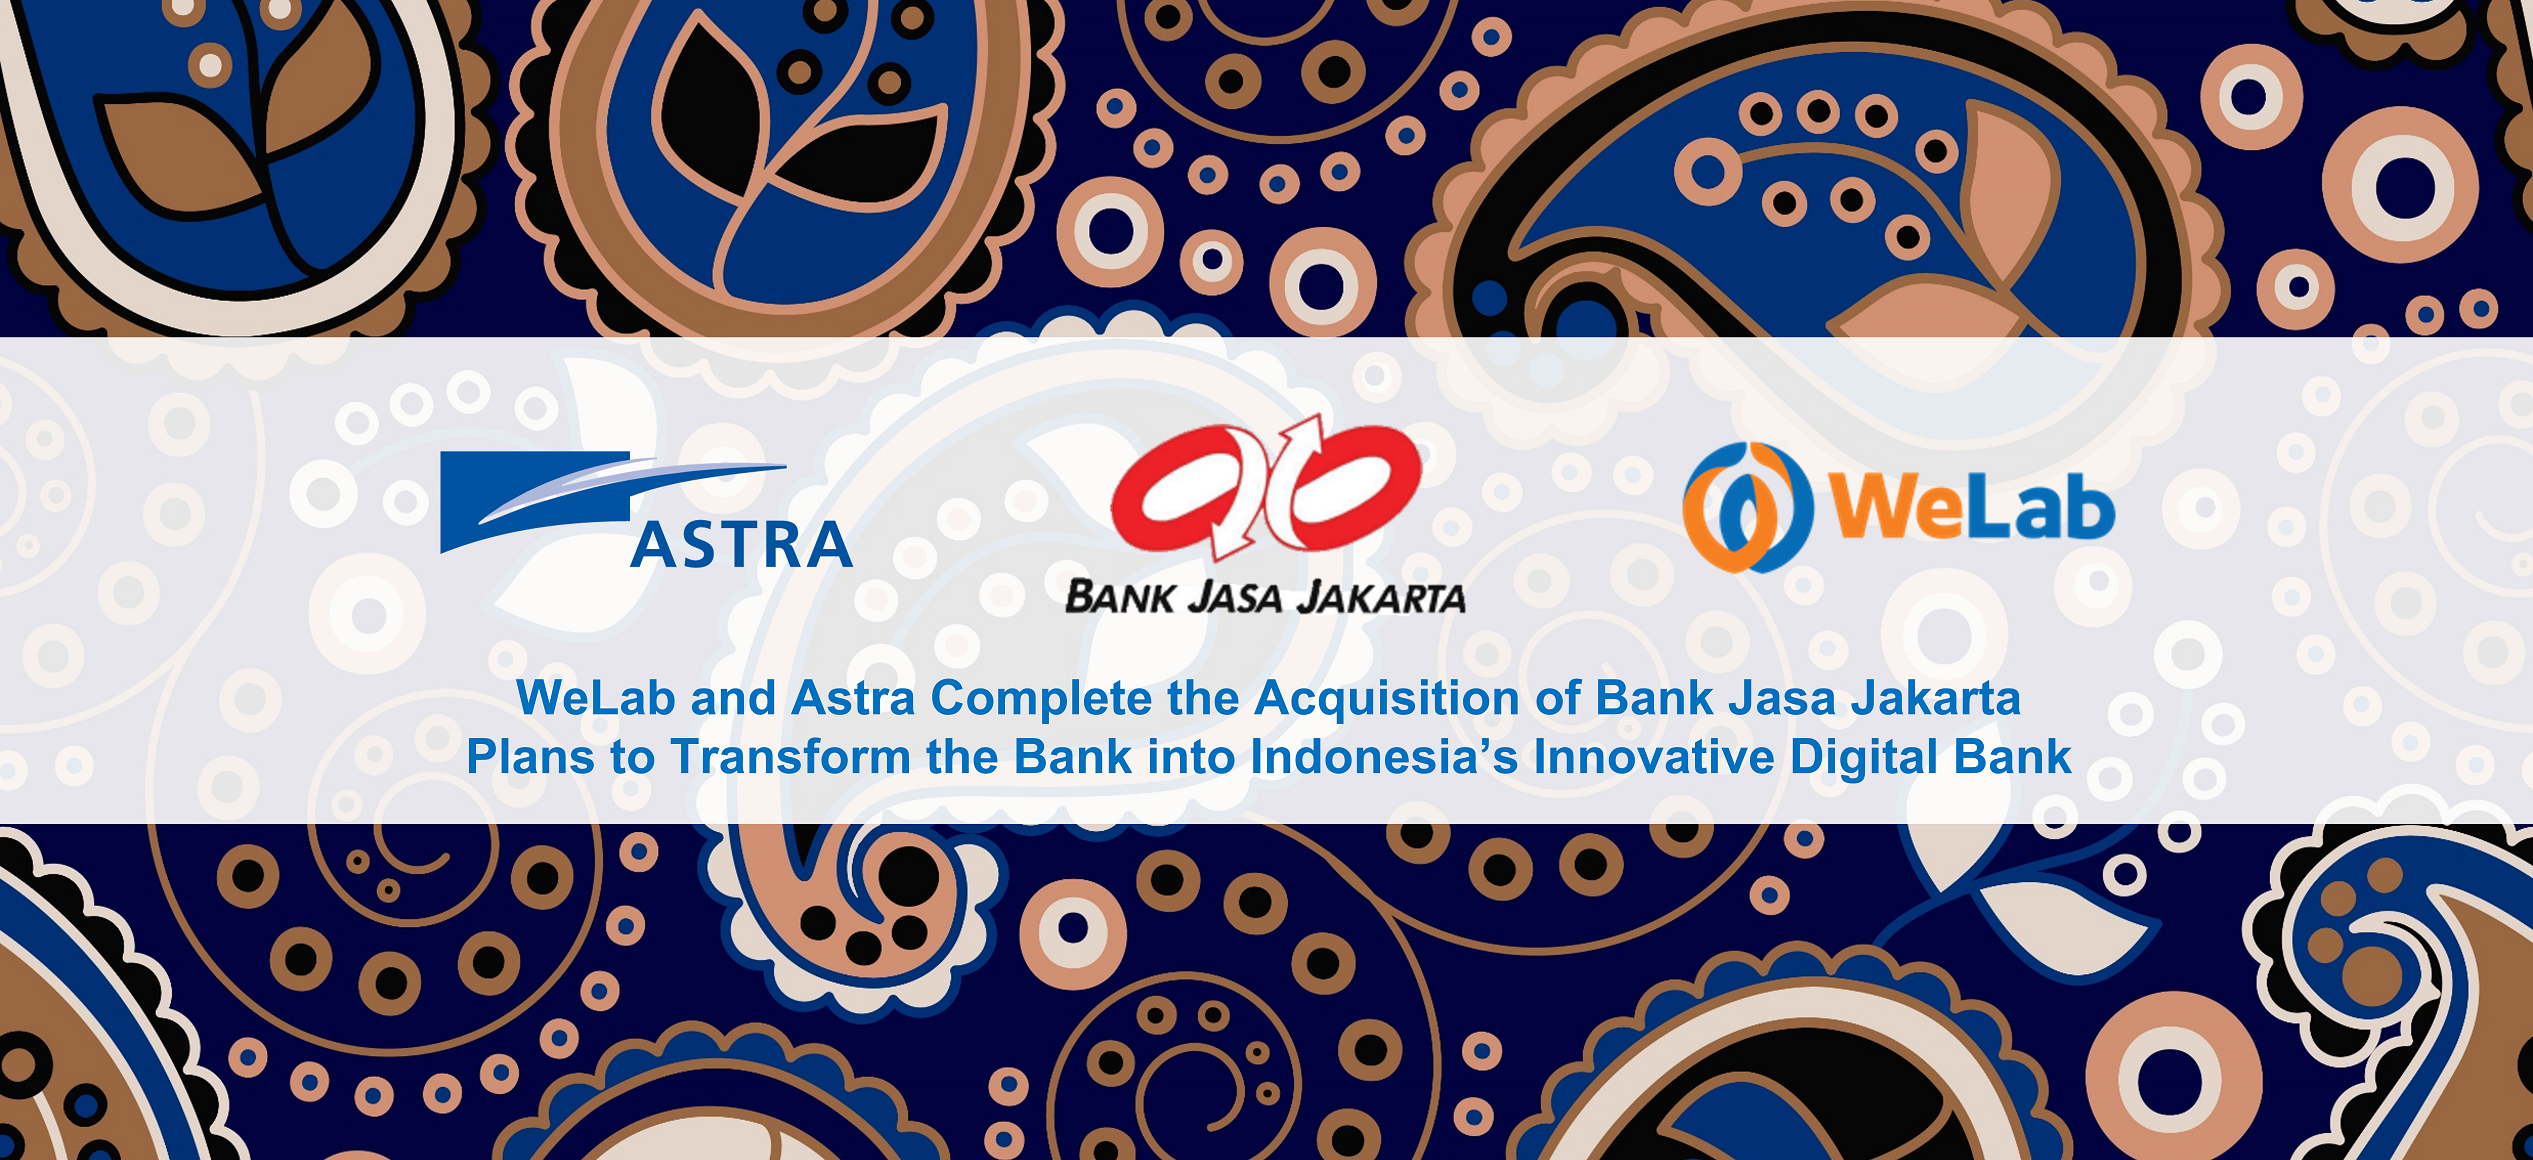 WeLab and Astra Complete the Acquisition of Bank Jasa Jakarta